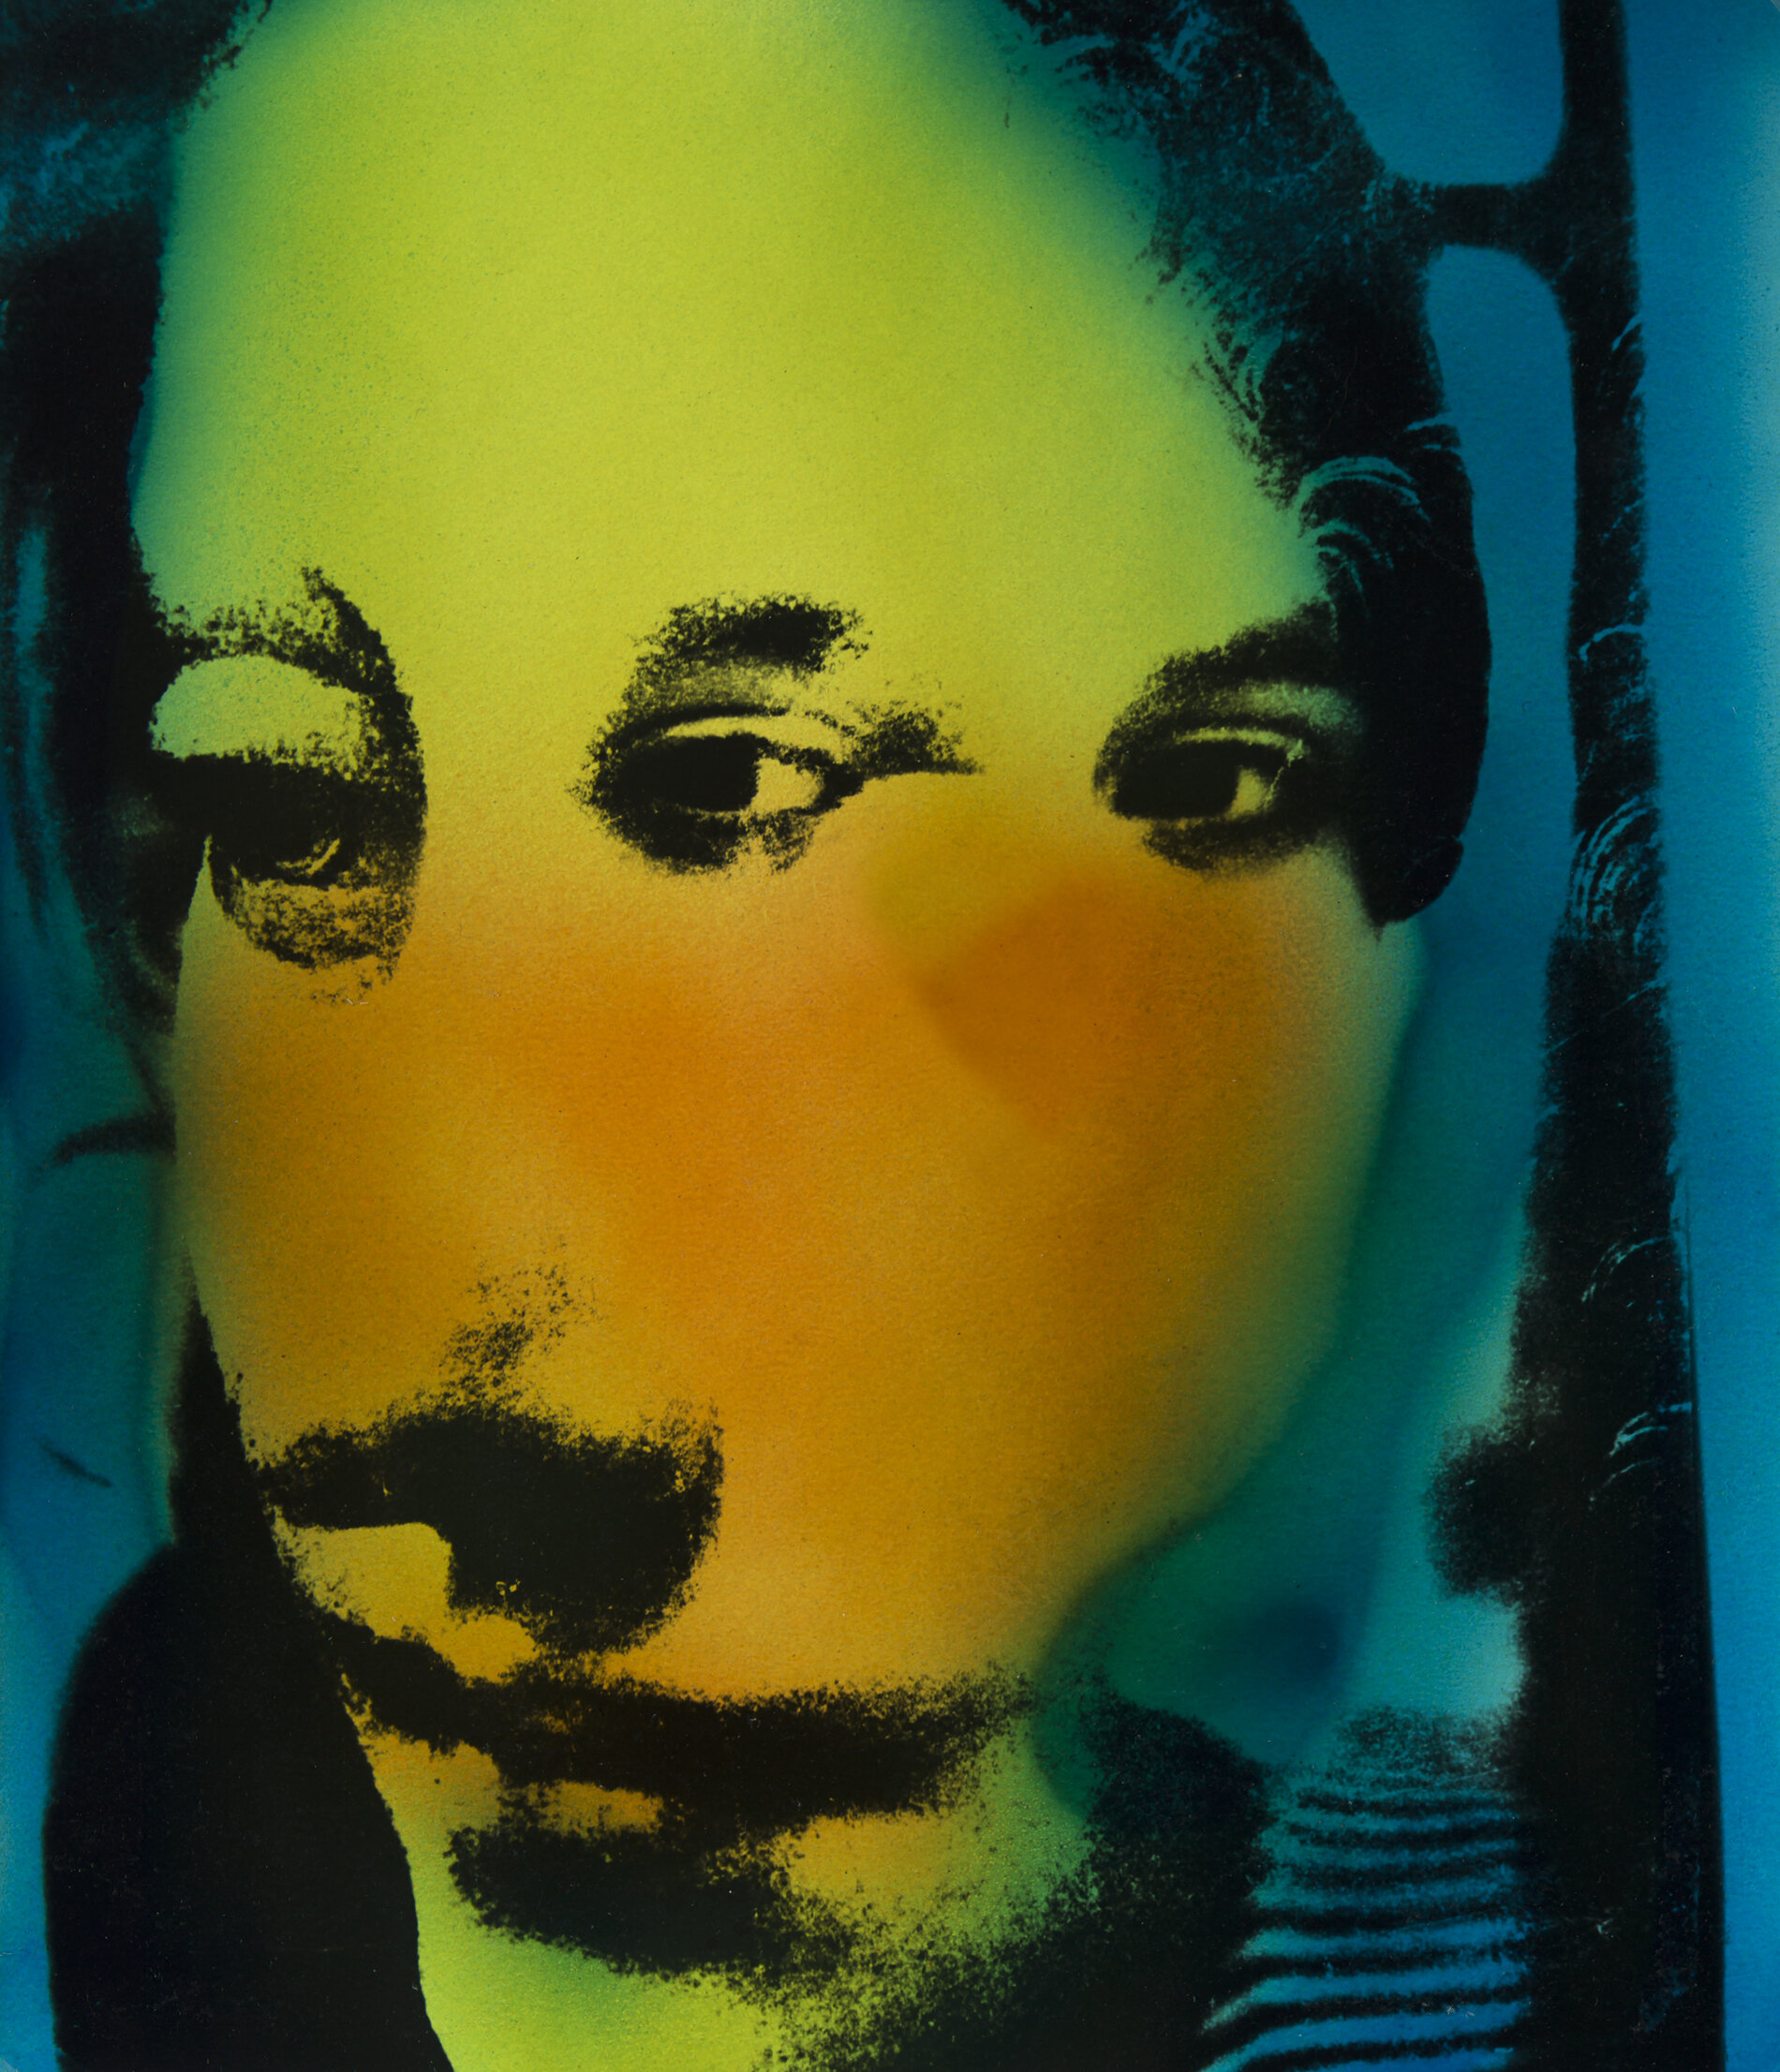 "3 Eyed Face", Artography, Palm Springs, CA, 1967